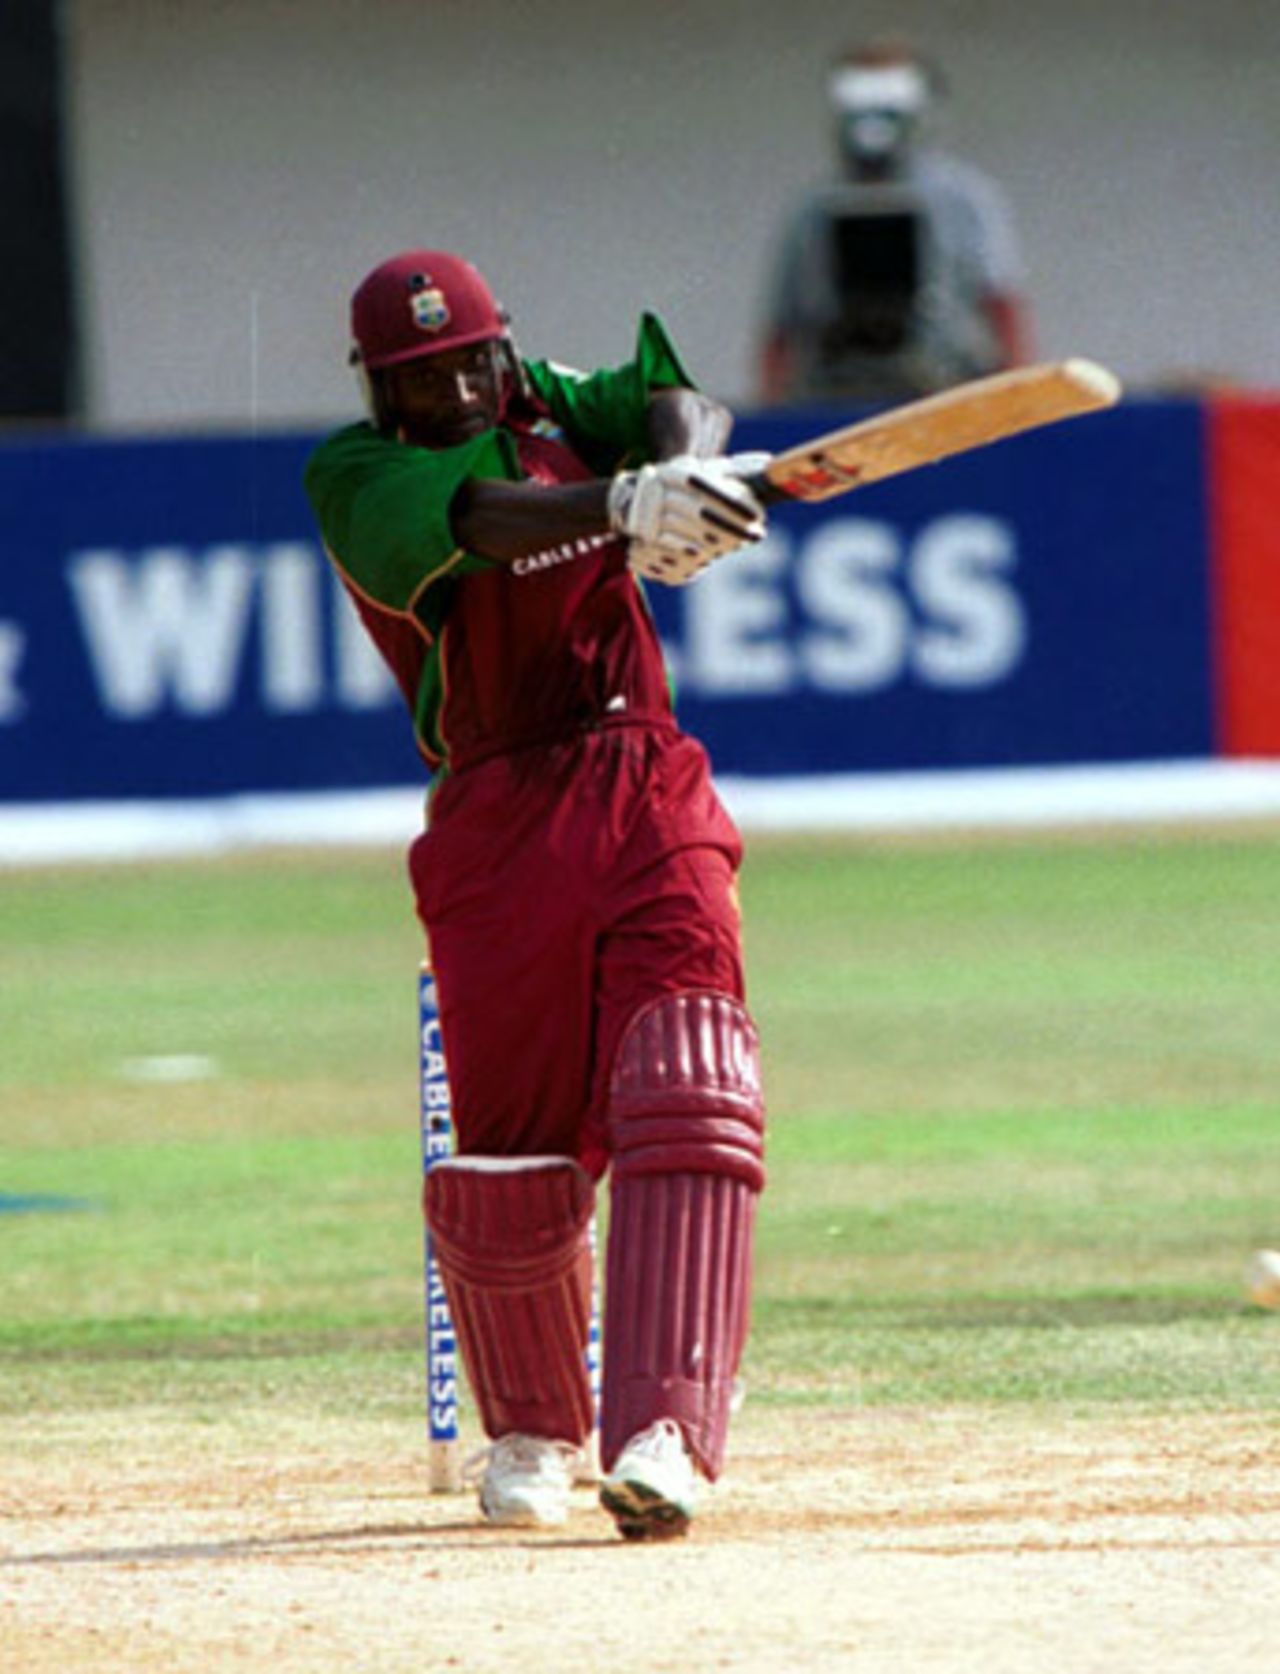 Skipper Carl Hooper pulls one to leg, 4th ODI at Queen's Park (New) St George's, Grenada , 6th May 2001